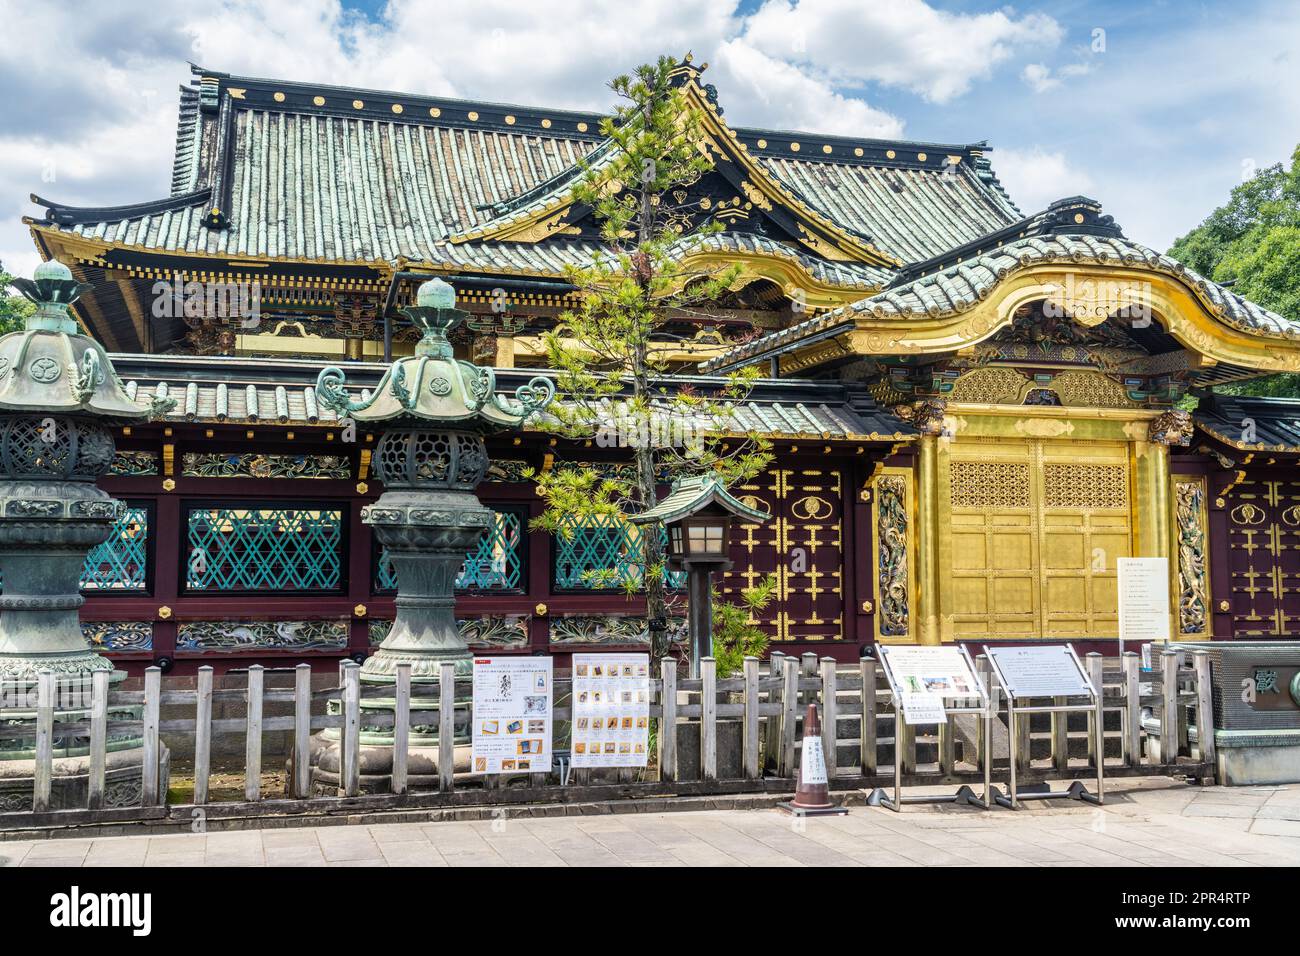 The Ueno Tosho-gu Shrine honden and Karamon in Ueno Park, Tokyo, Japan. The shrine was constructed in 1627 and is considered a great example of Shinto architecture from the Edo period. Stock Photo